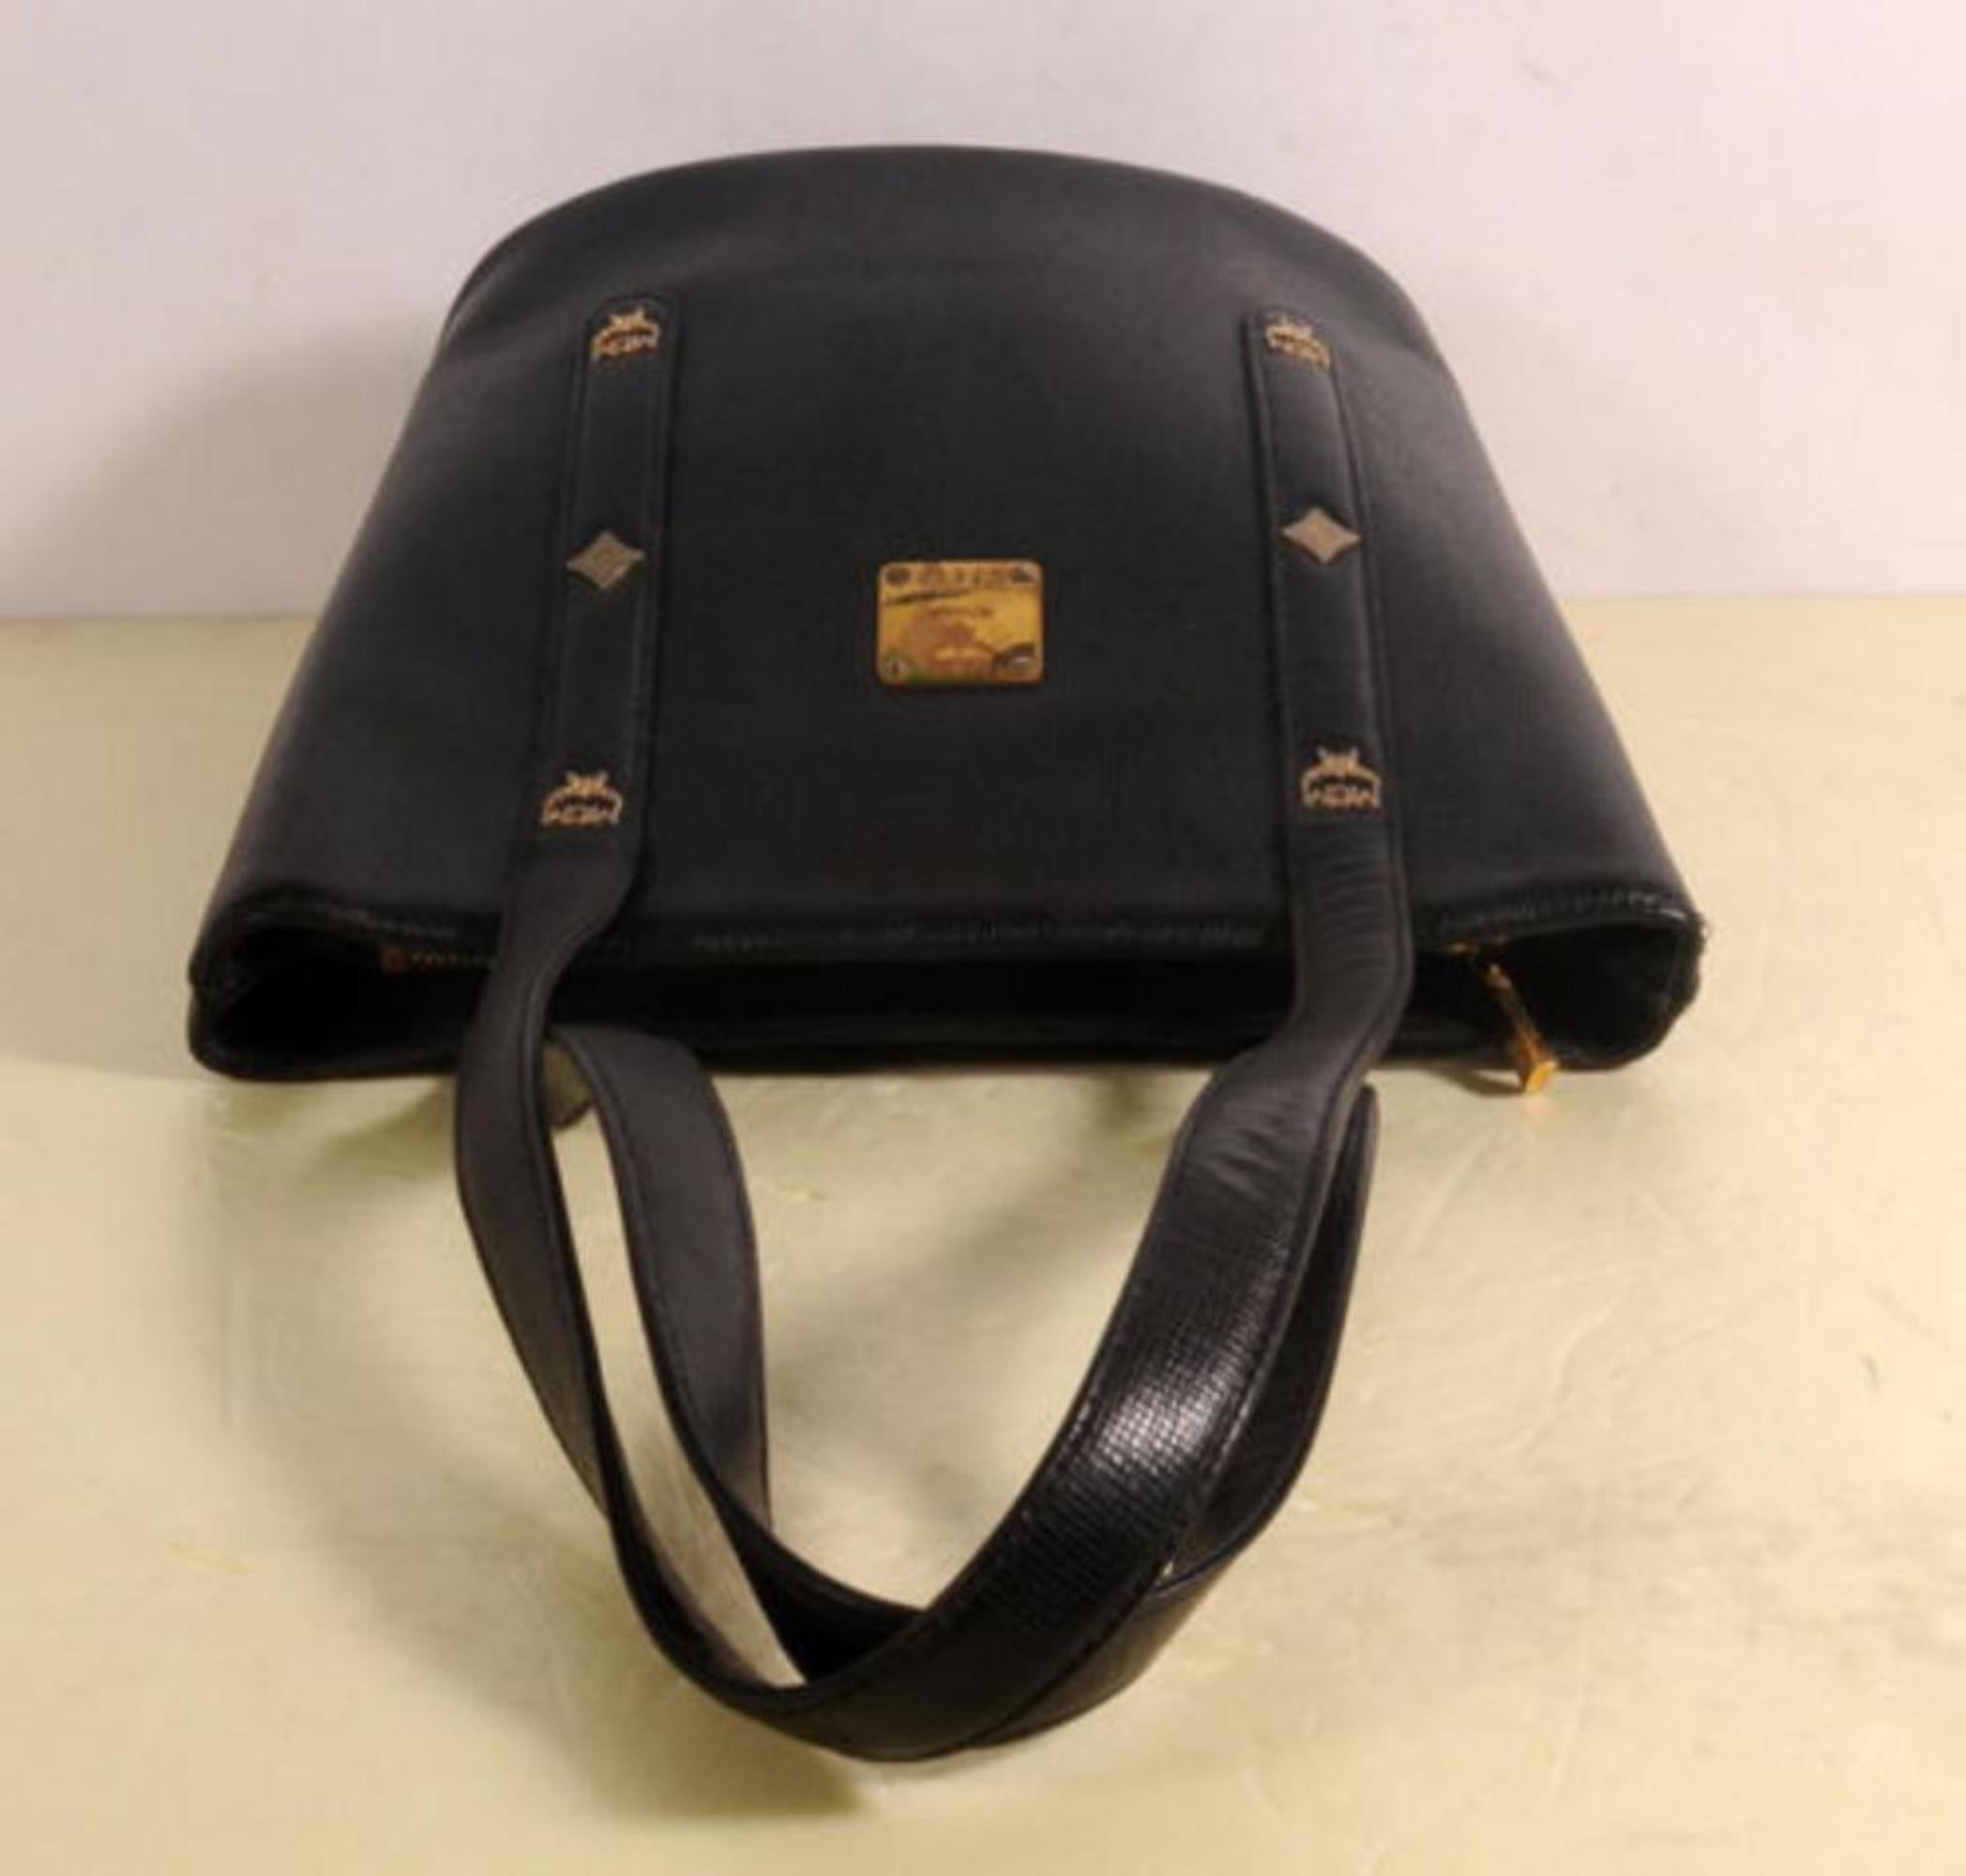 VERY GOOD VINTAGE CONDITION
(7/10 or B)
Includes Dust Bag
This item does not come with any extra accessories.
Please review photos for more details.
Color appearance may vary depending on your monitor settings.
SKU : 868497